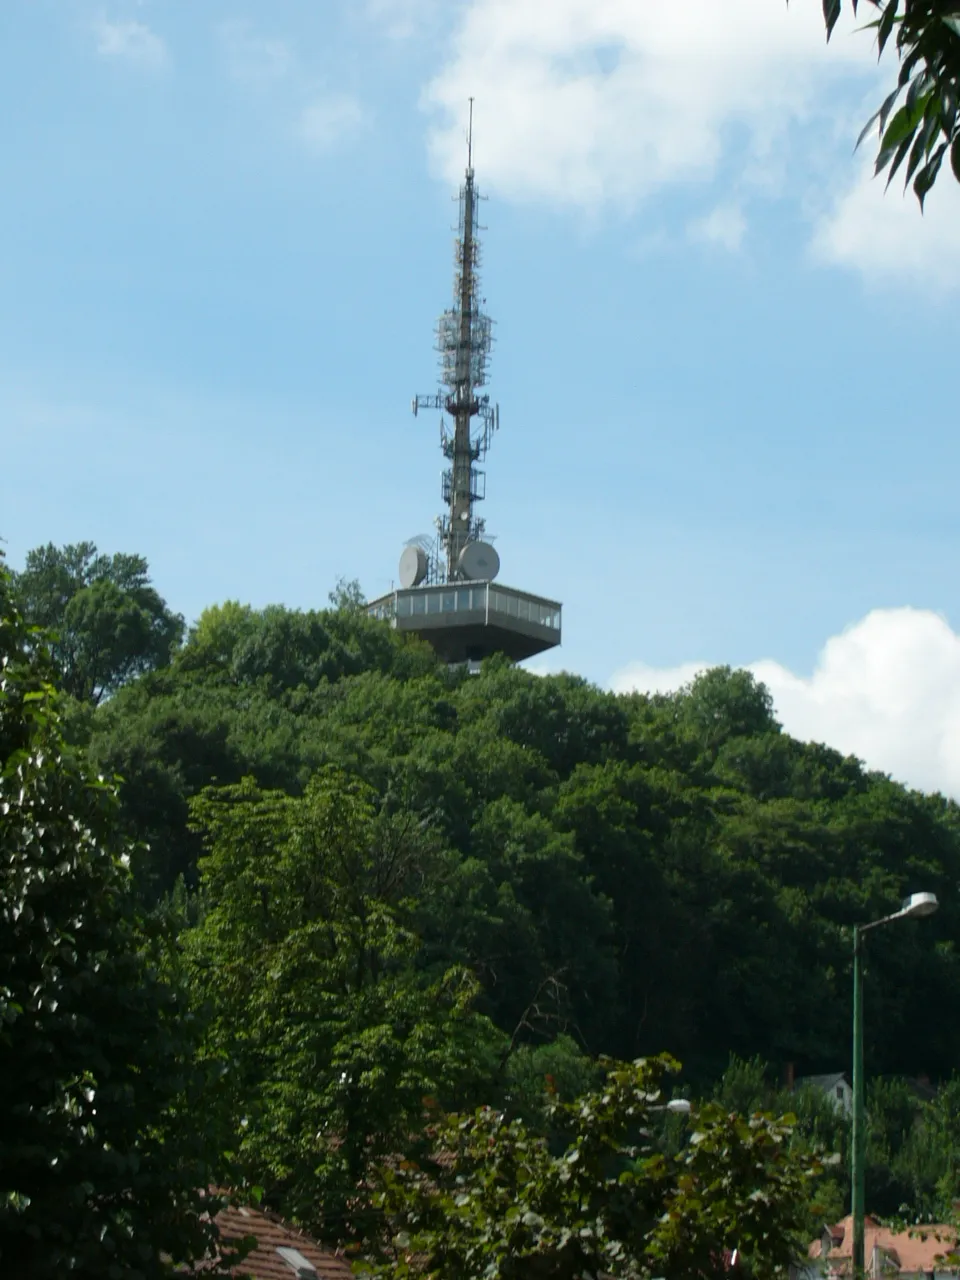 Photo showing: The TV tower on the Avas hill in Miskolc, Hungary; the tower is the symbol of the City.